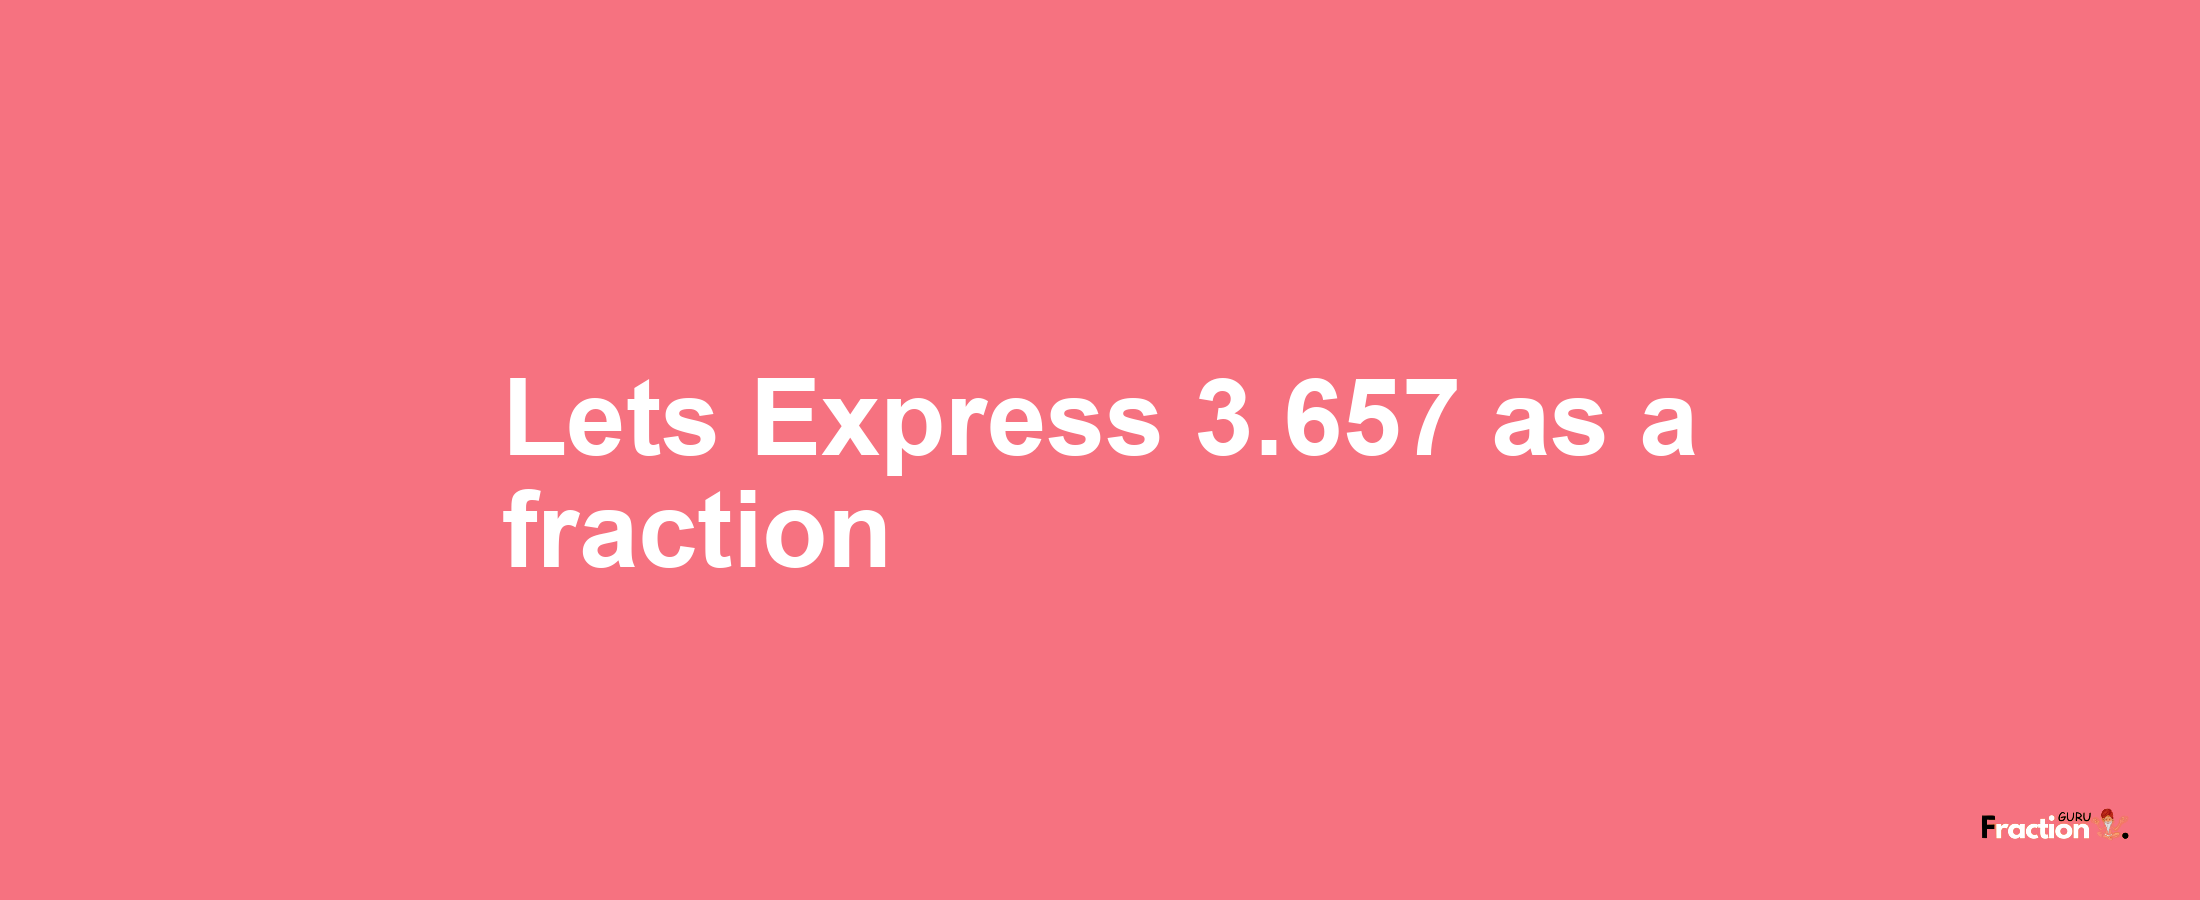 Lets Express 3.657 as afraction